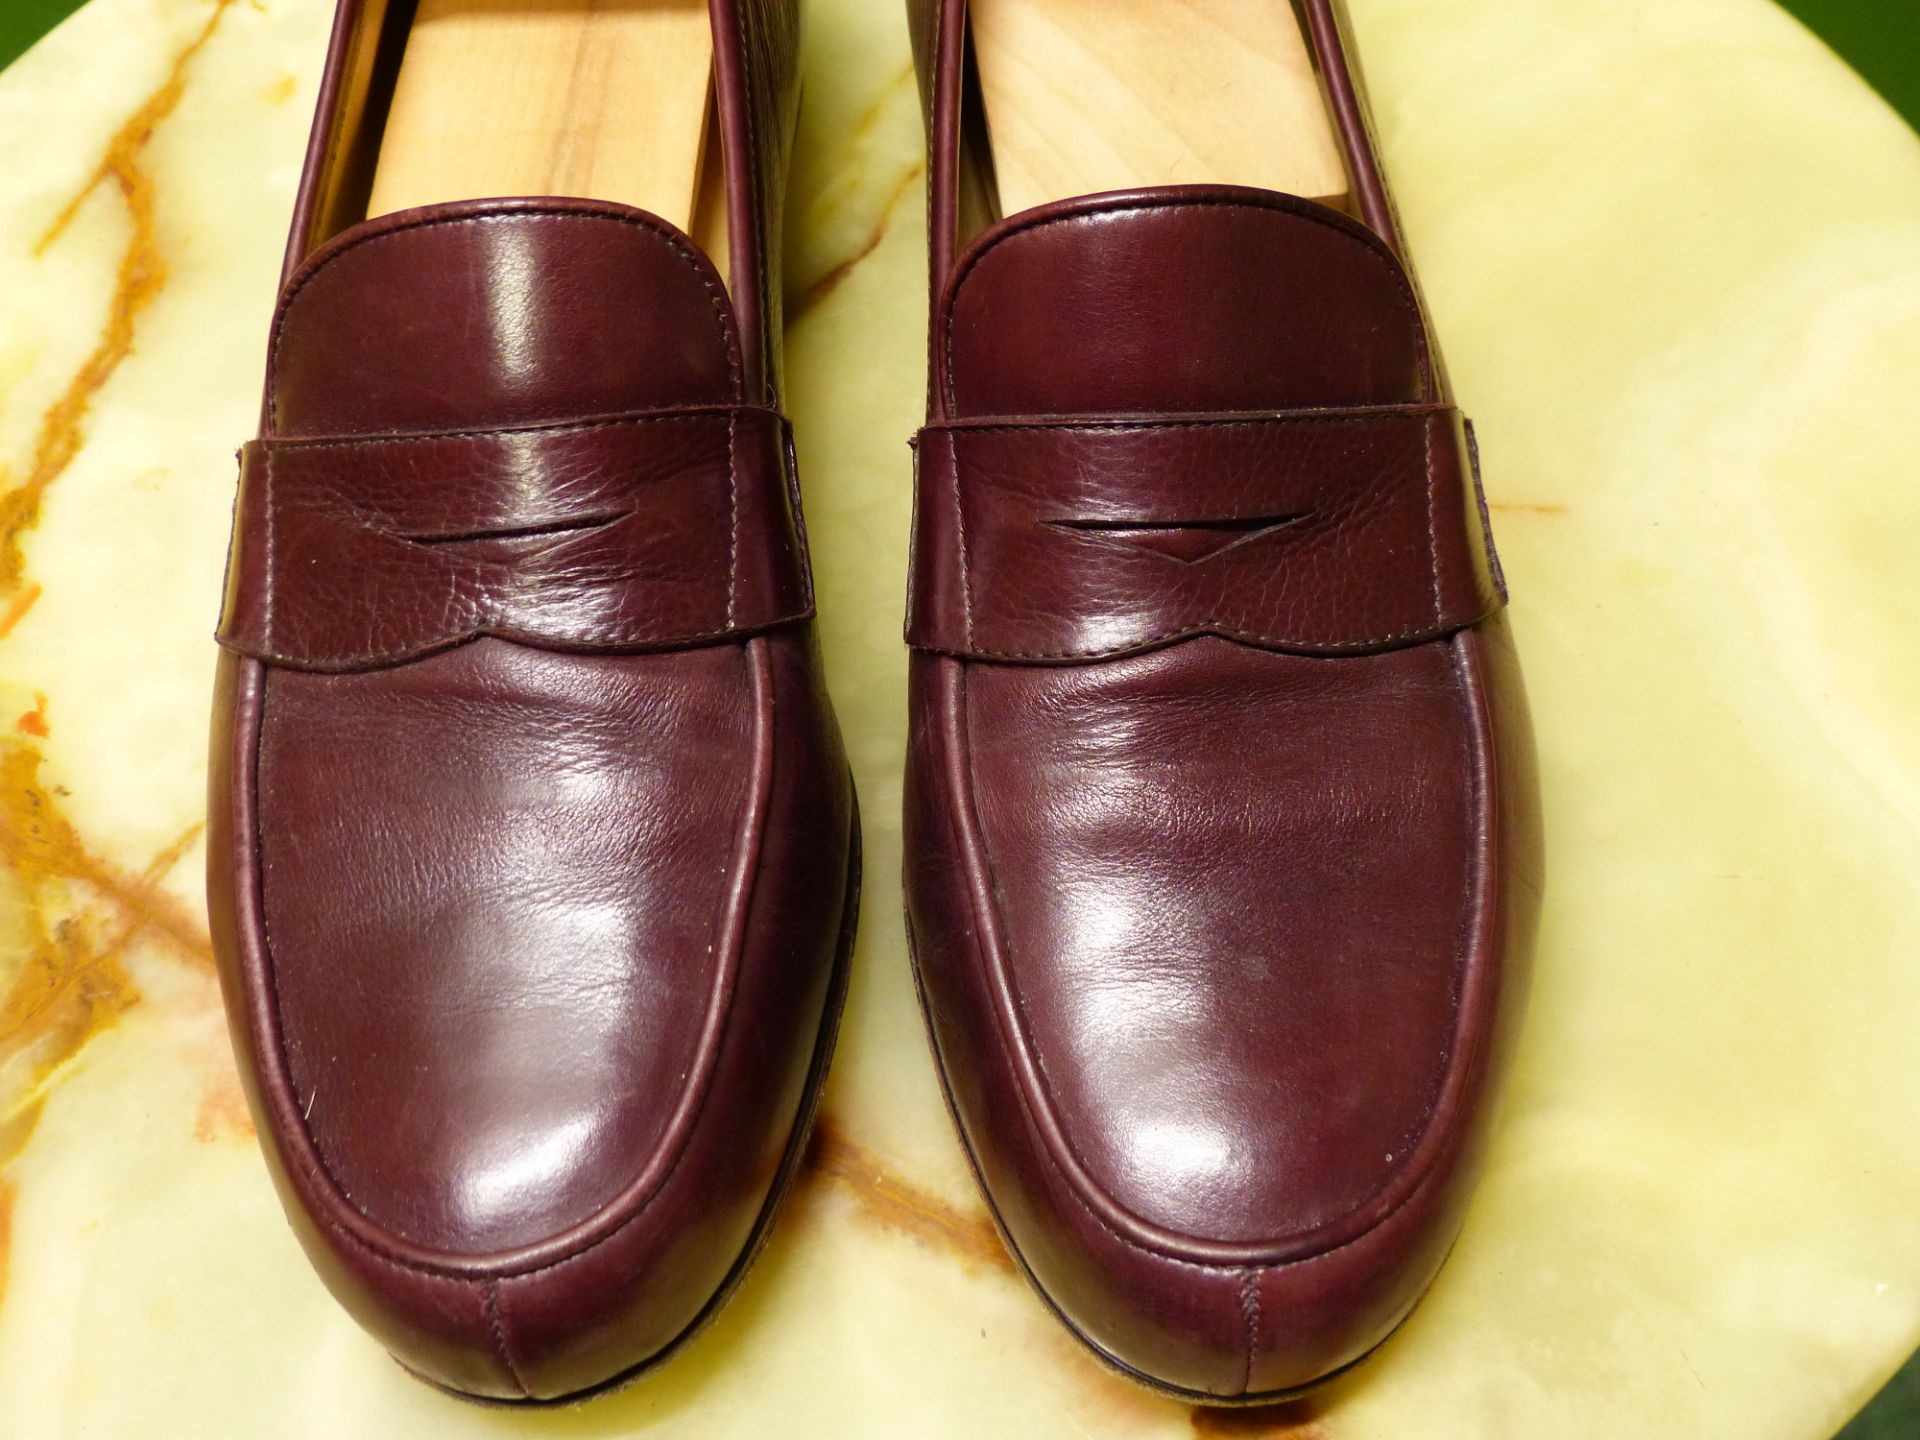 SHOES. UNUTZER BURGUNDY LOAFERS EUR SIZE 40 (BOX) CAPUCINE BROWN SUEDE HEALS UK SIZE 6, AND TANINO - Image 6 of 15